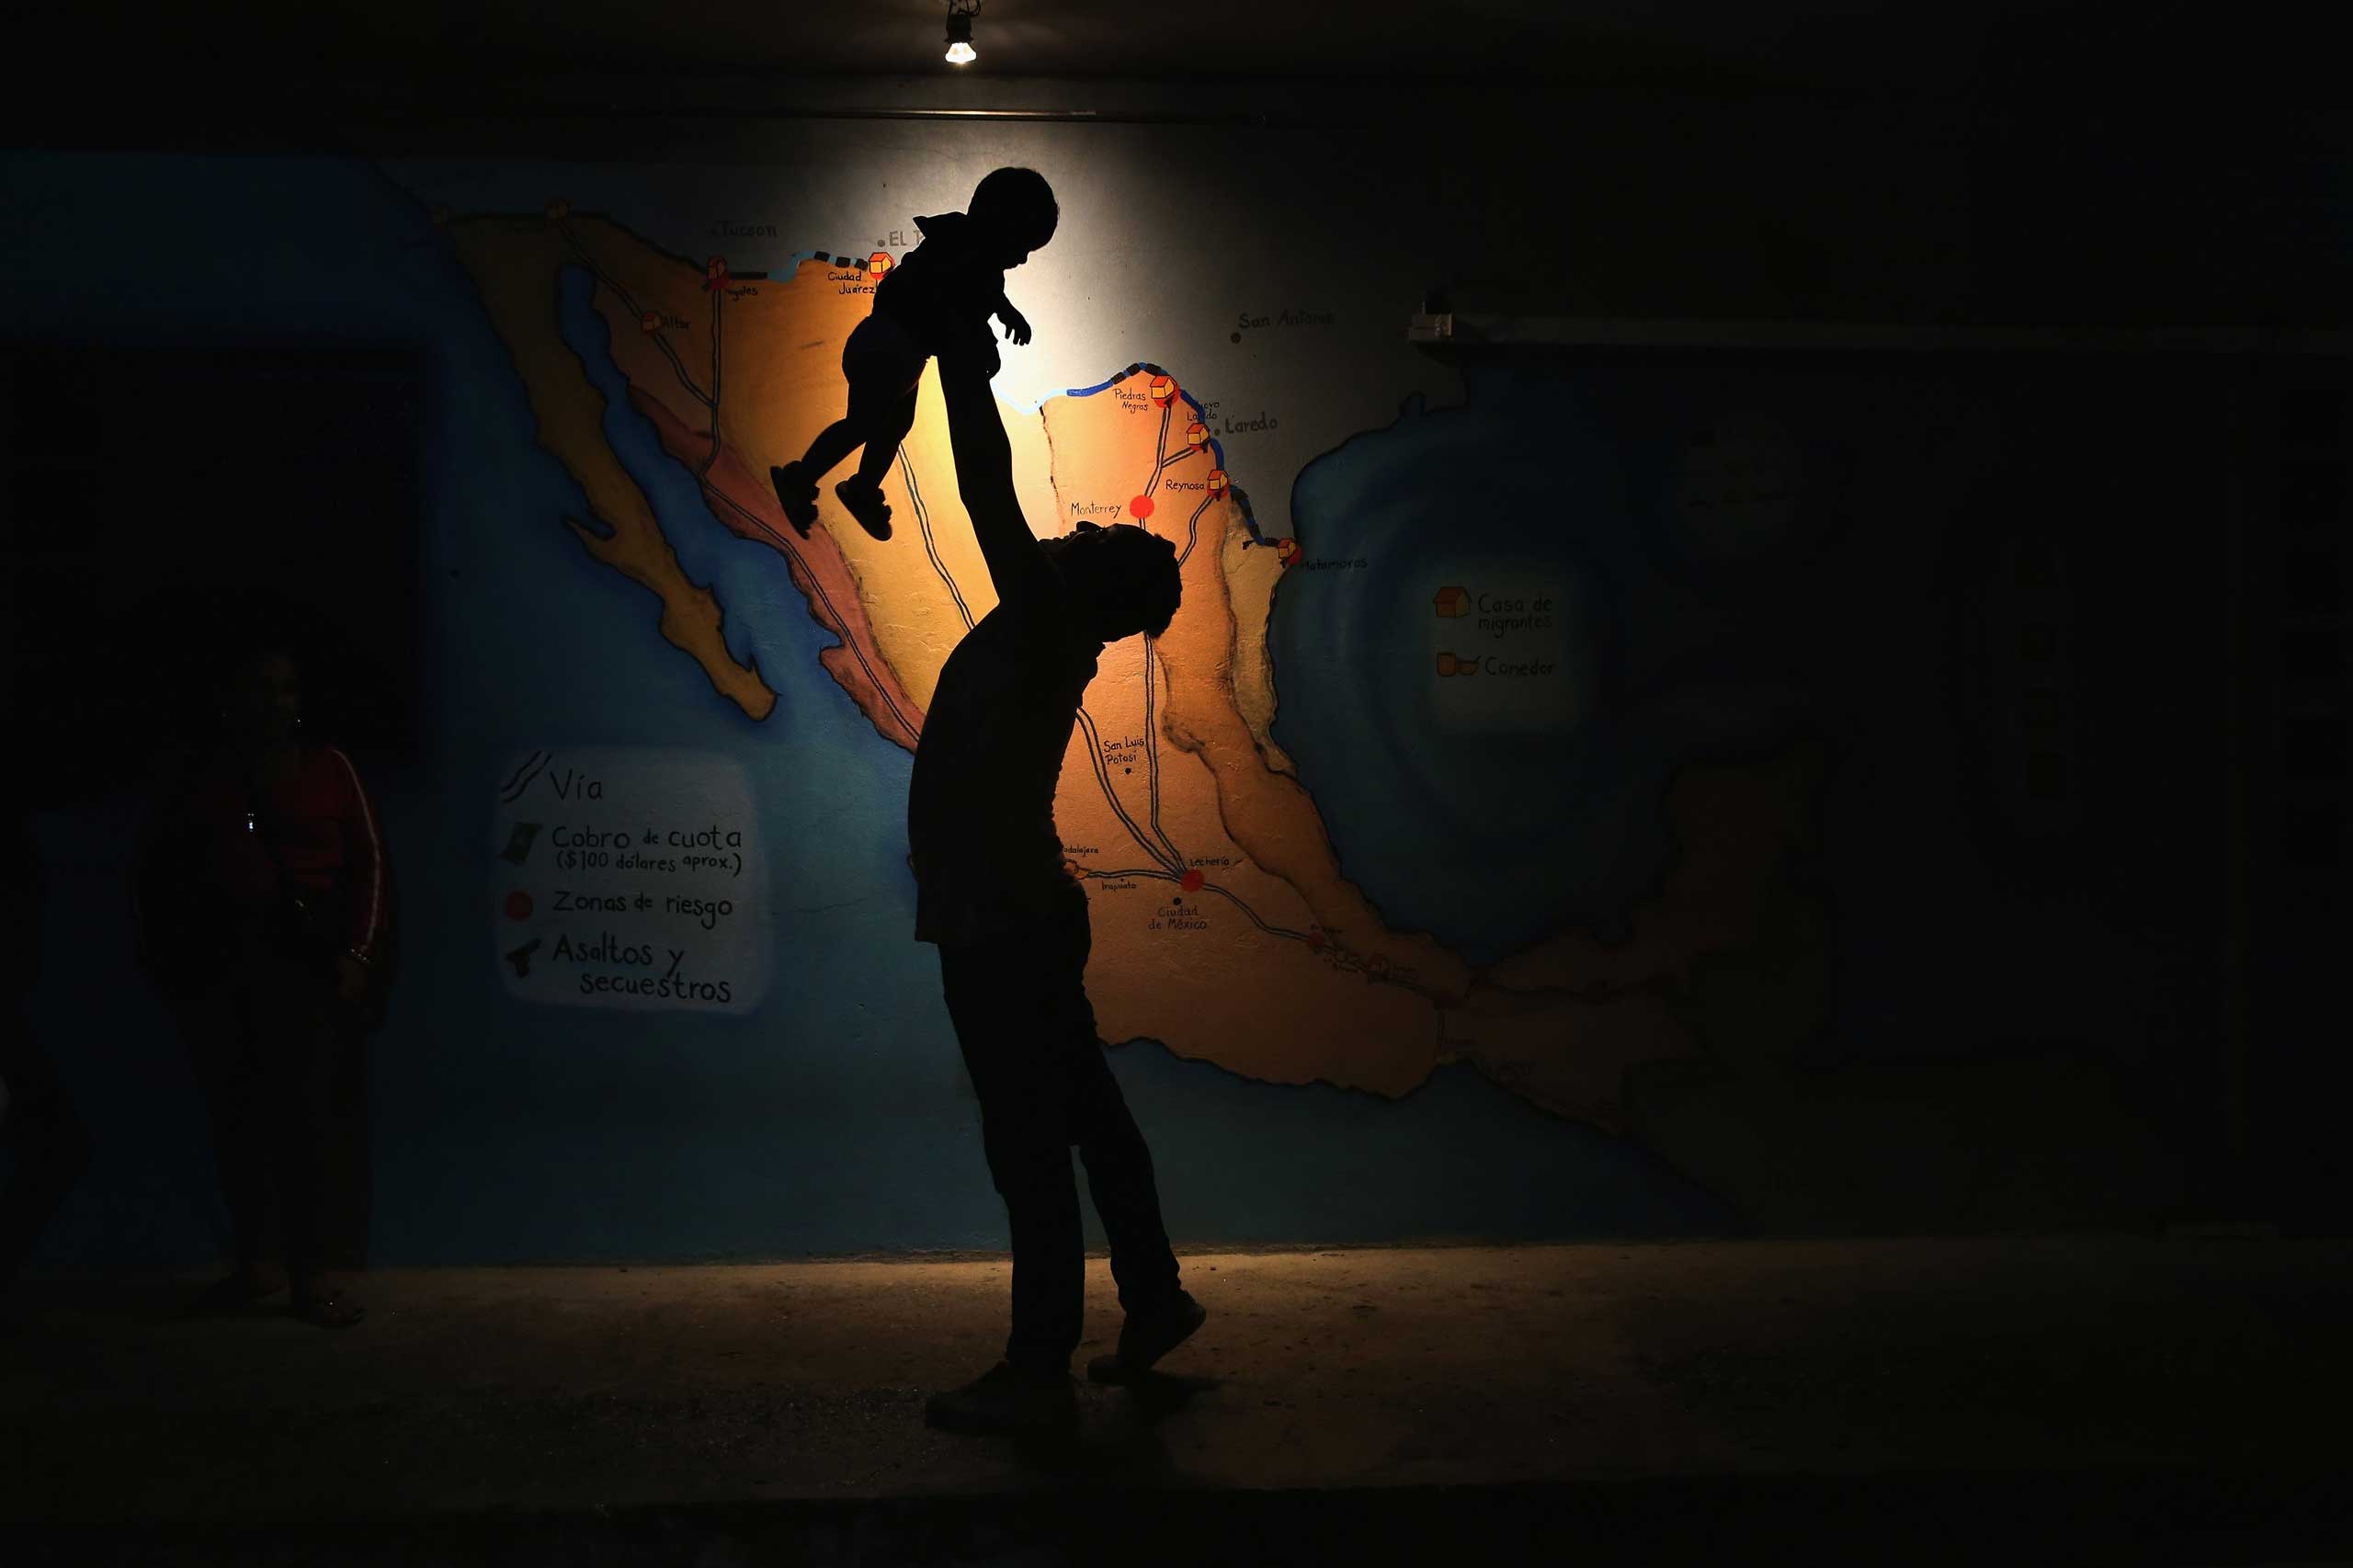 A Honduran immigrant entertains a fellow immigrant's child in front of a map of Mexico on September 14, 2014 in Tenosique, Mexico.